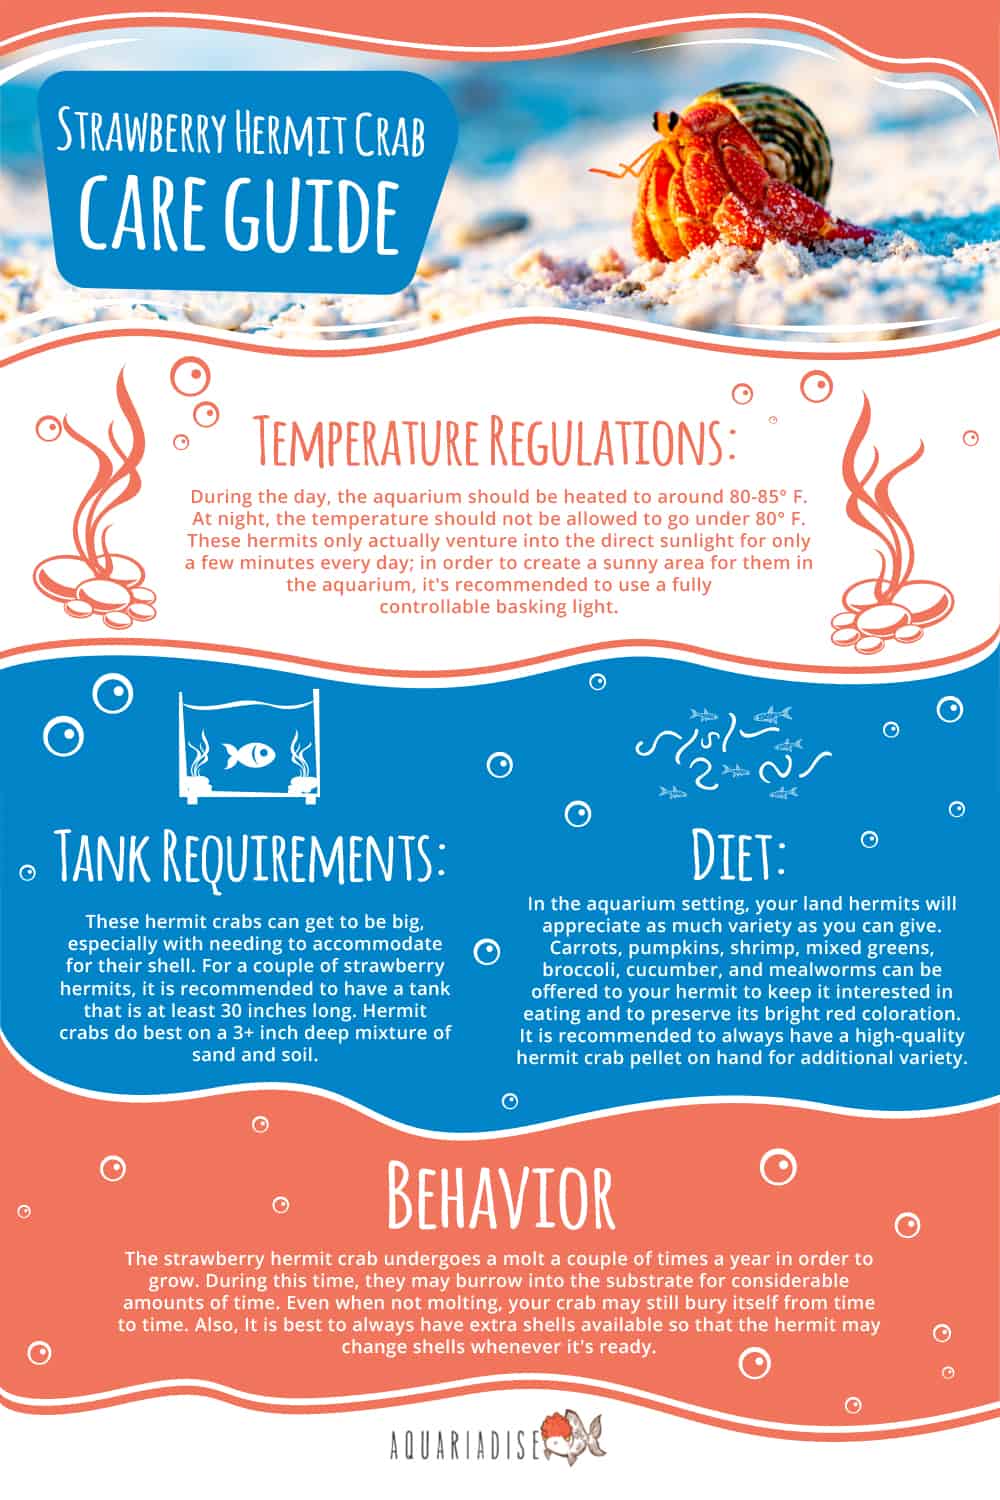 Strawberry Hermit Crab Care Guide Infographic